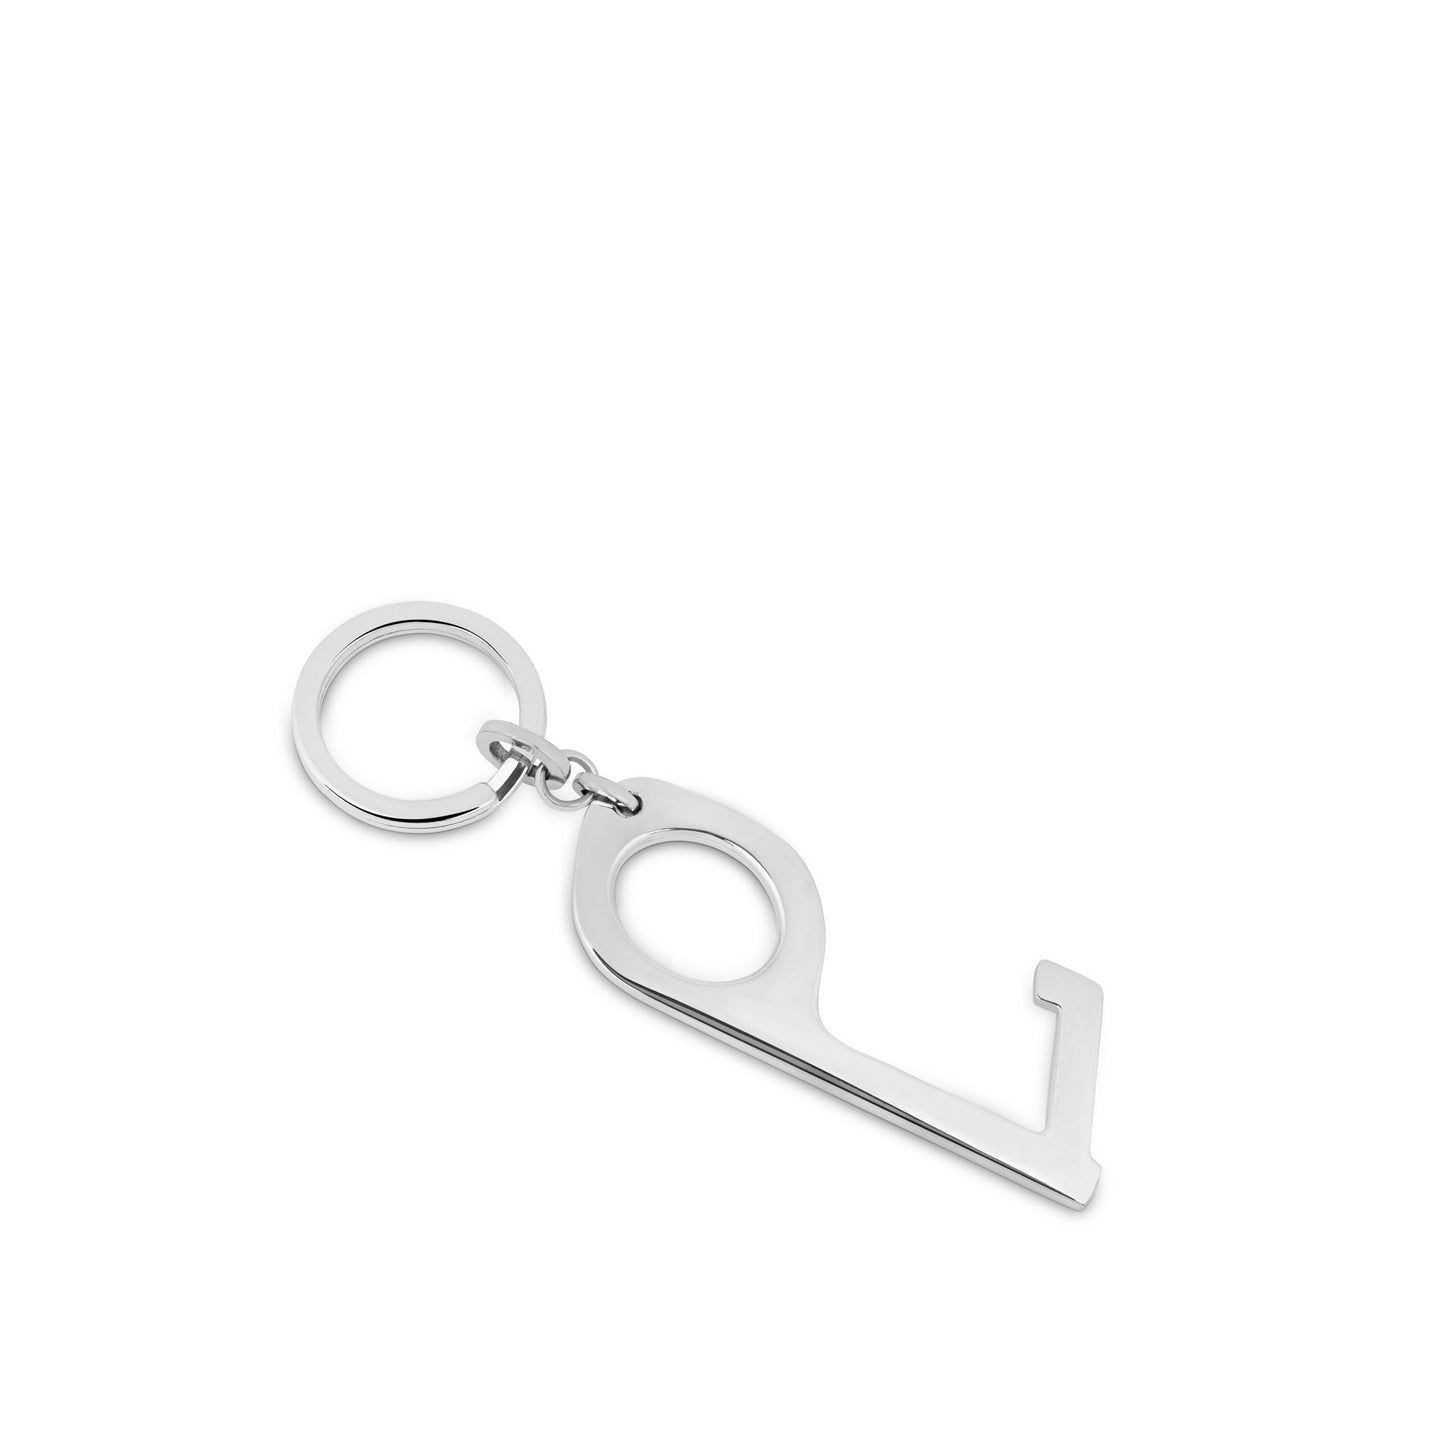 Non-Touch Keyring in Sterling Silver